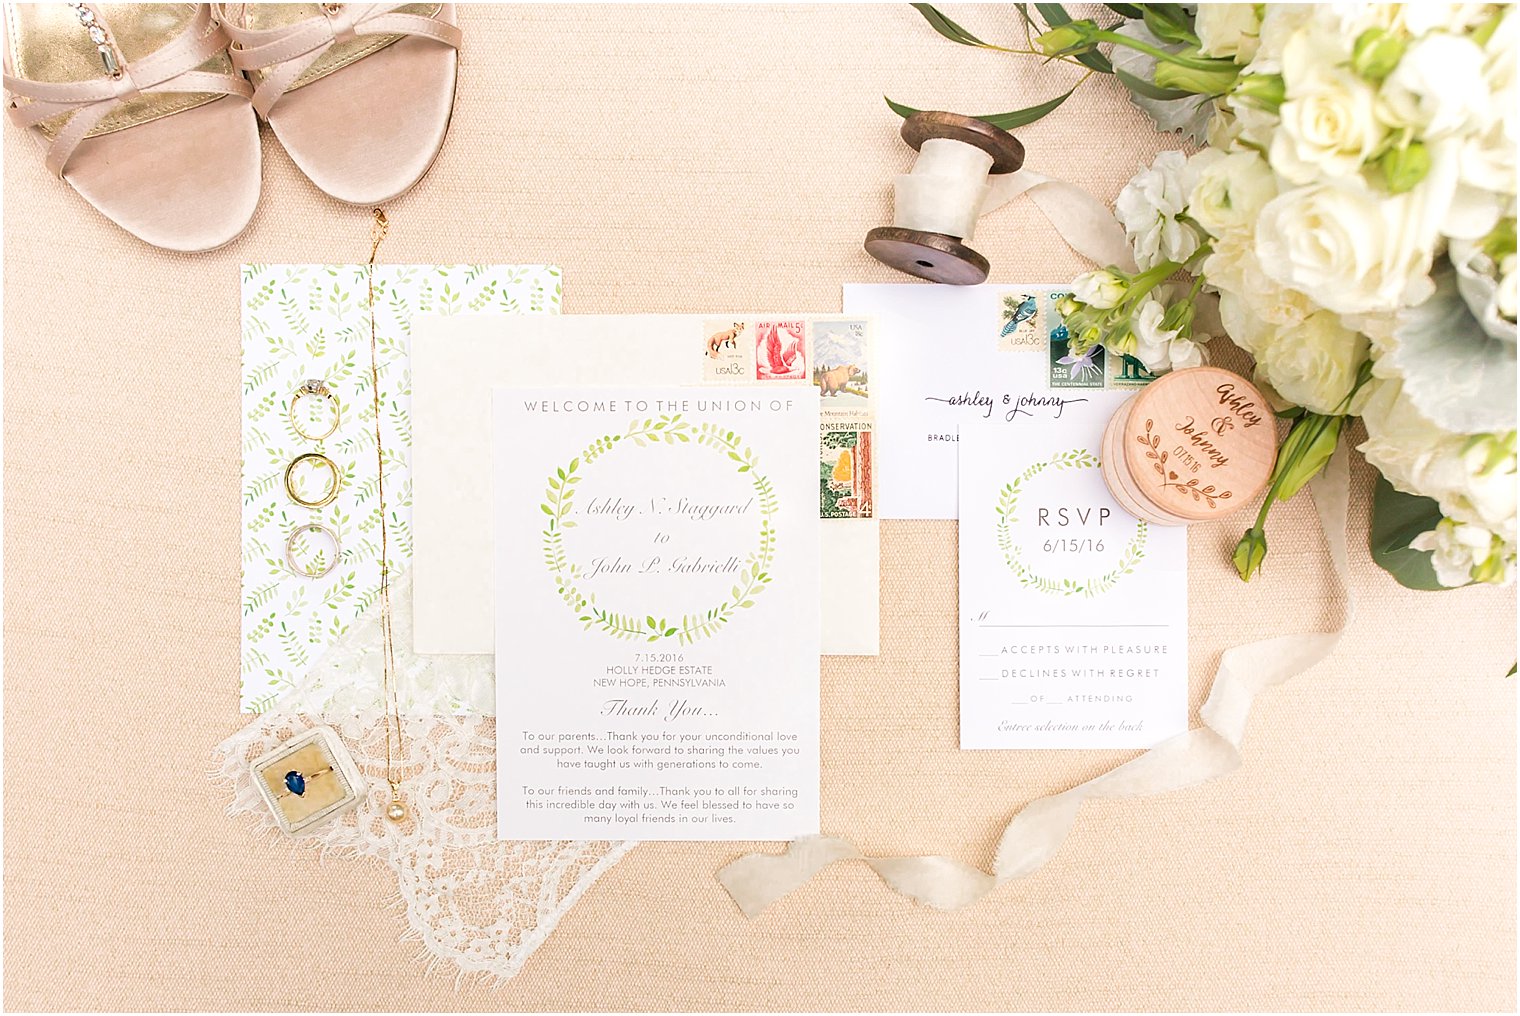 Invitations by Zazzle and Florals by Mark Bryan Designs